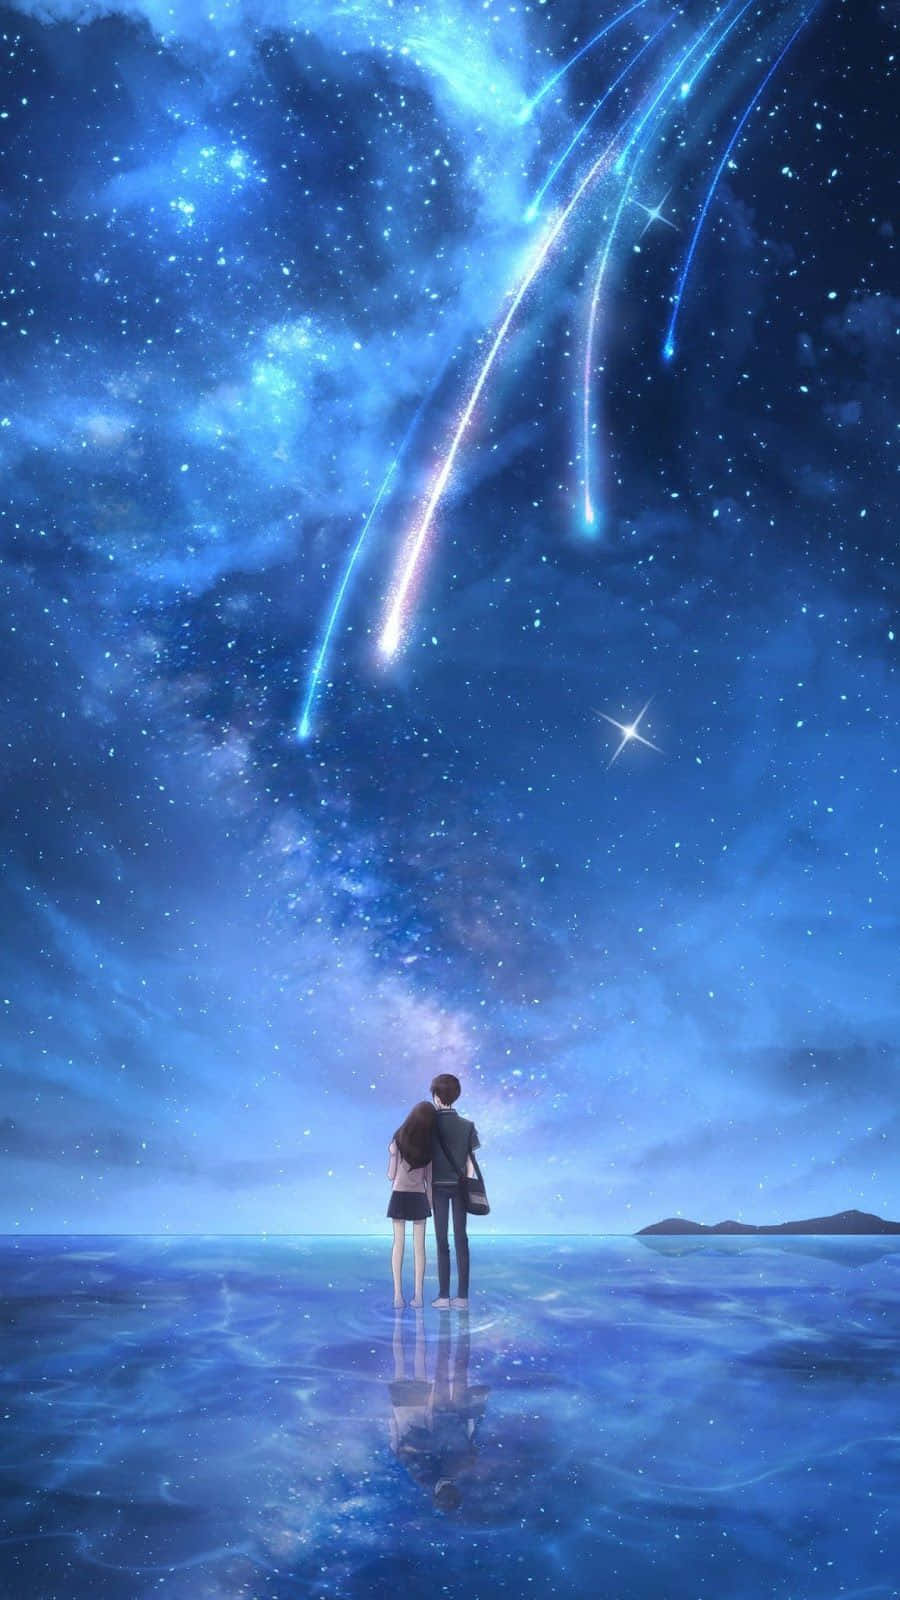 Magical Night Sky With Couple With Many Shooting Stars Background